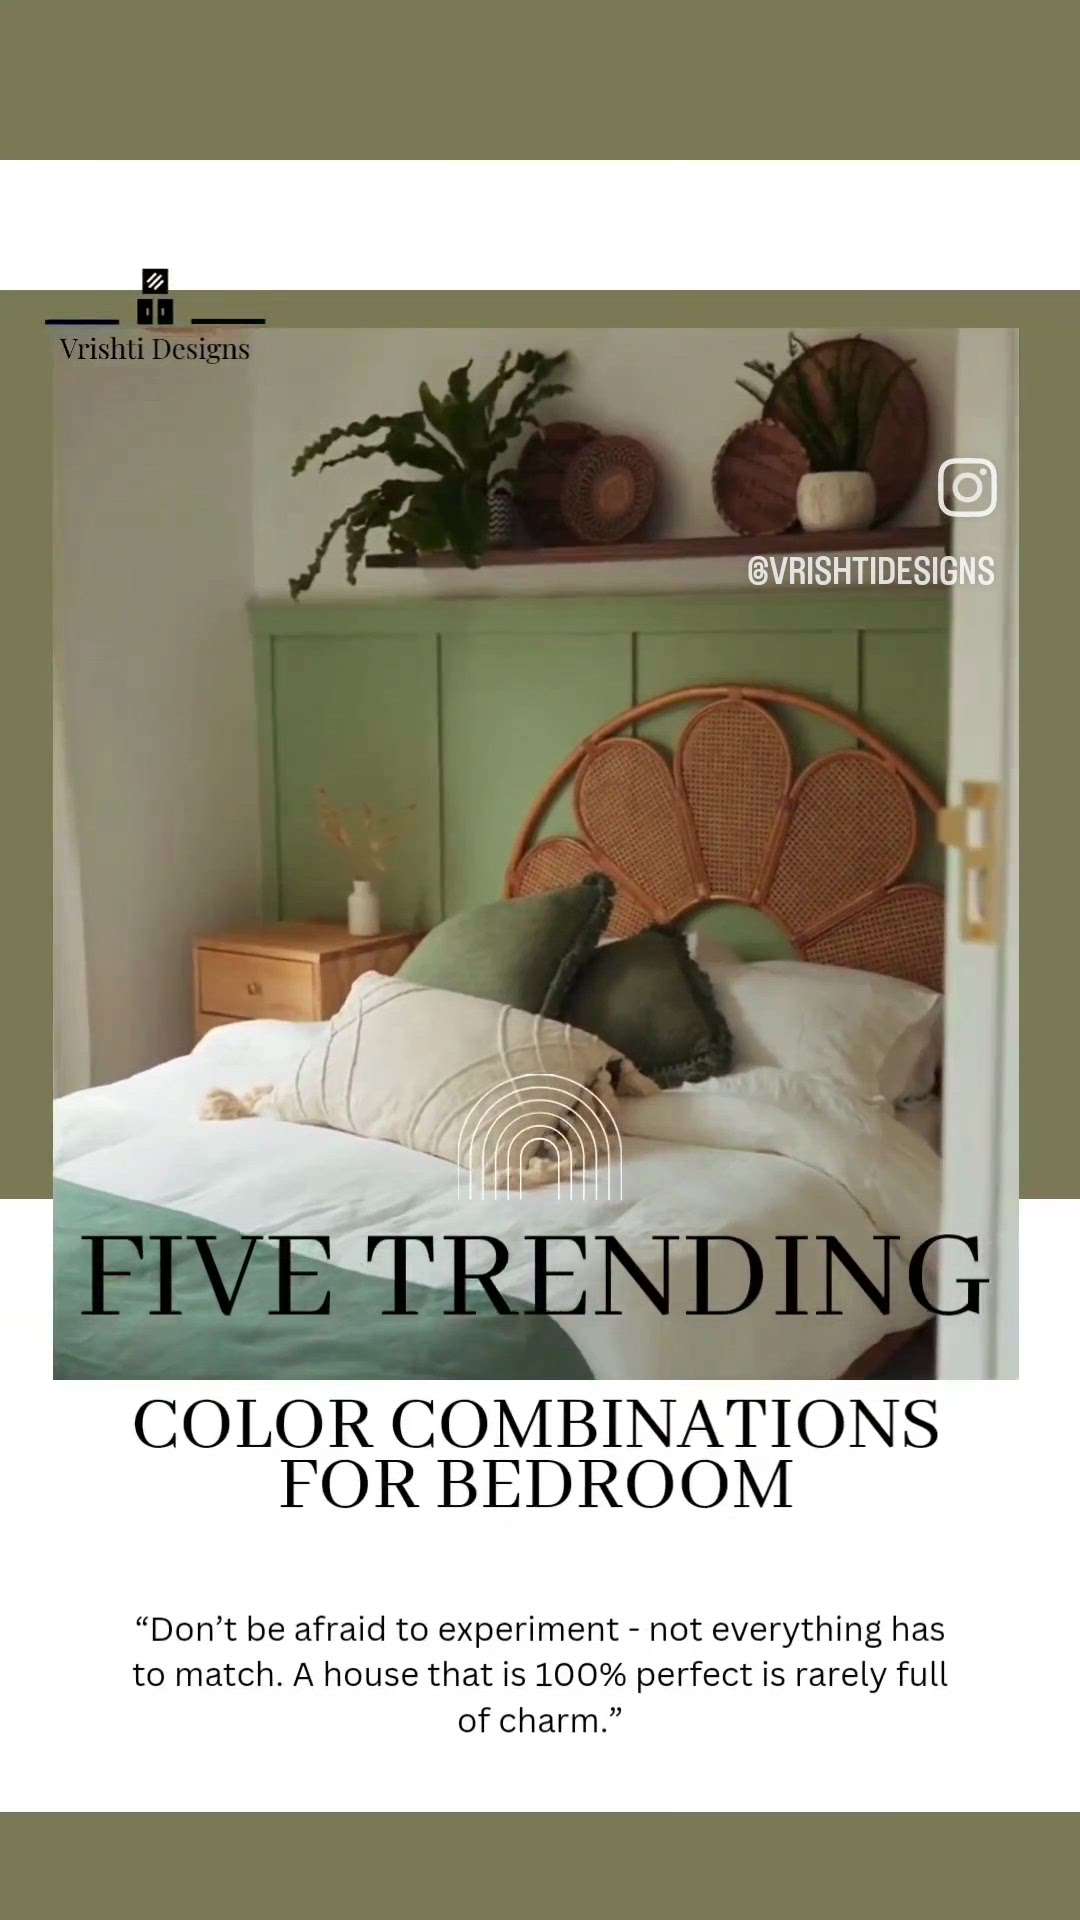 Transform Your Bedroom with These Five Trending Color Combinations! 🎨🛌 Create a haven of tranquility and style with these captivating bedroom color palettes. From soothing neutrals to bold statements, we bring you five inspiring combinations that will turn your bedroom into a dreamy retreat. Which one speaks to your personal style? Let us know in the comments! 👇💤  #BedroomColorCombinations #InteriorDesignInspo #DreamyRetreat #HomeDecorIdeas #VrishtiDesigns